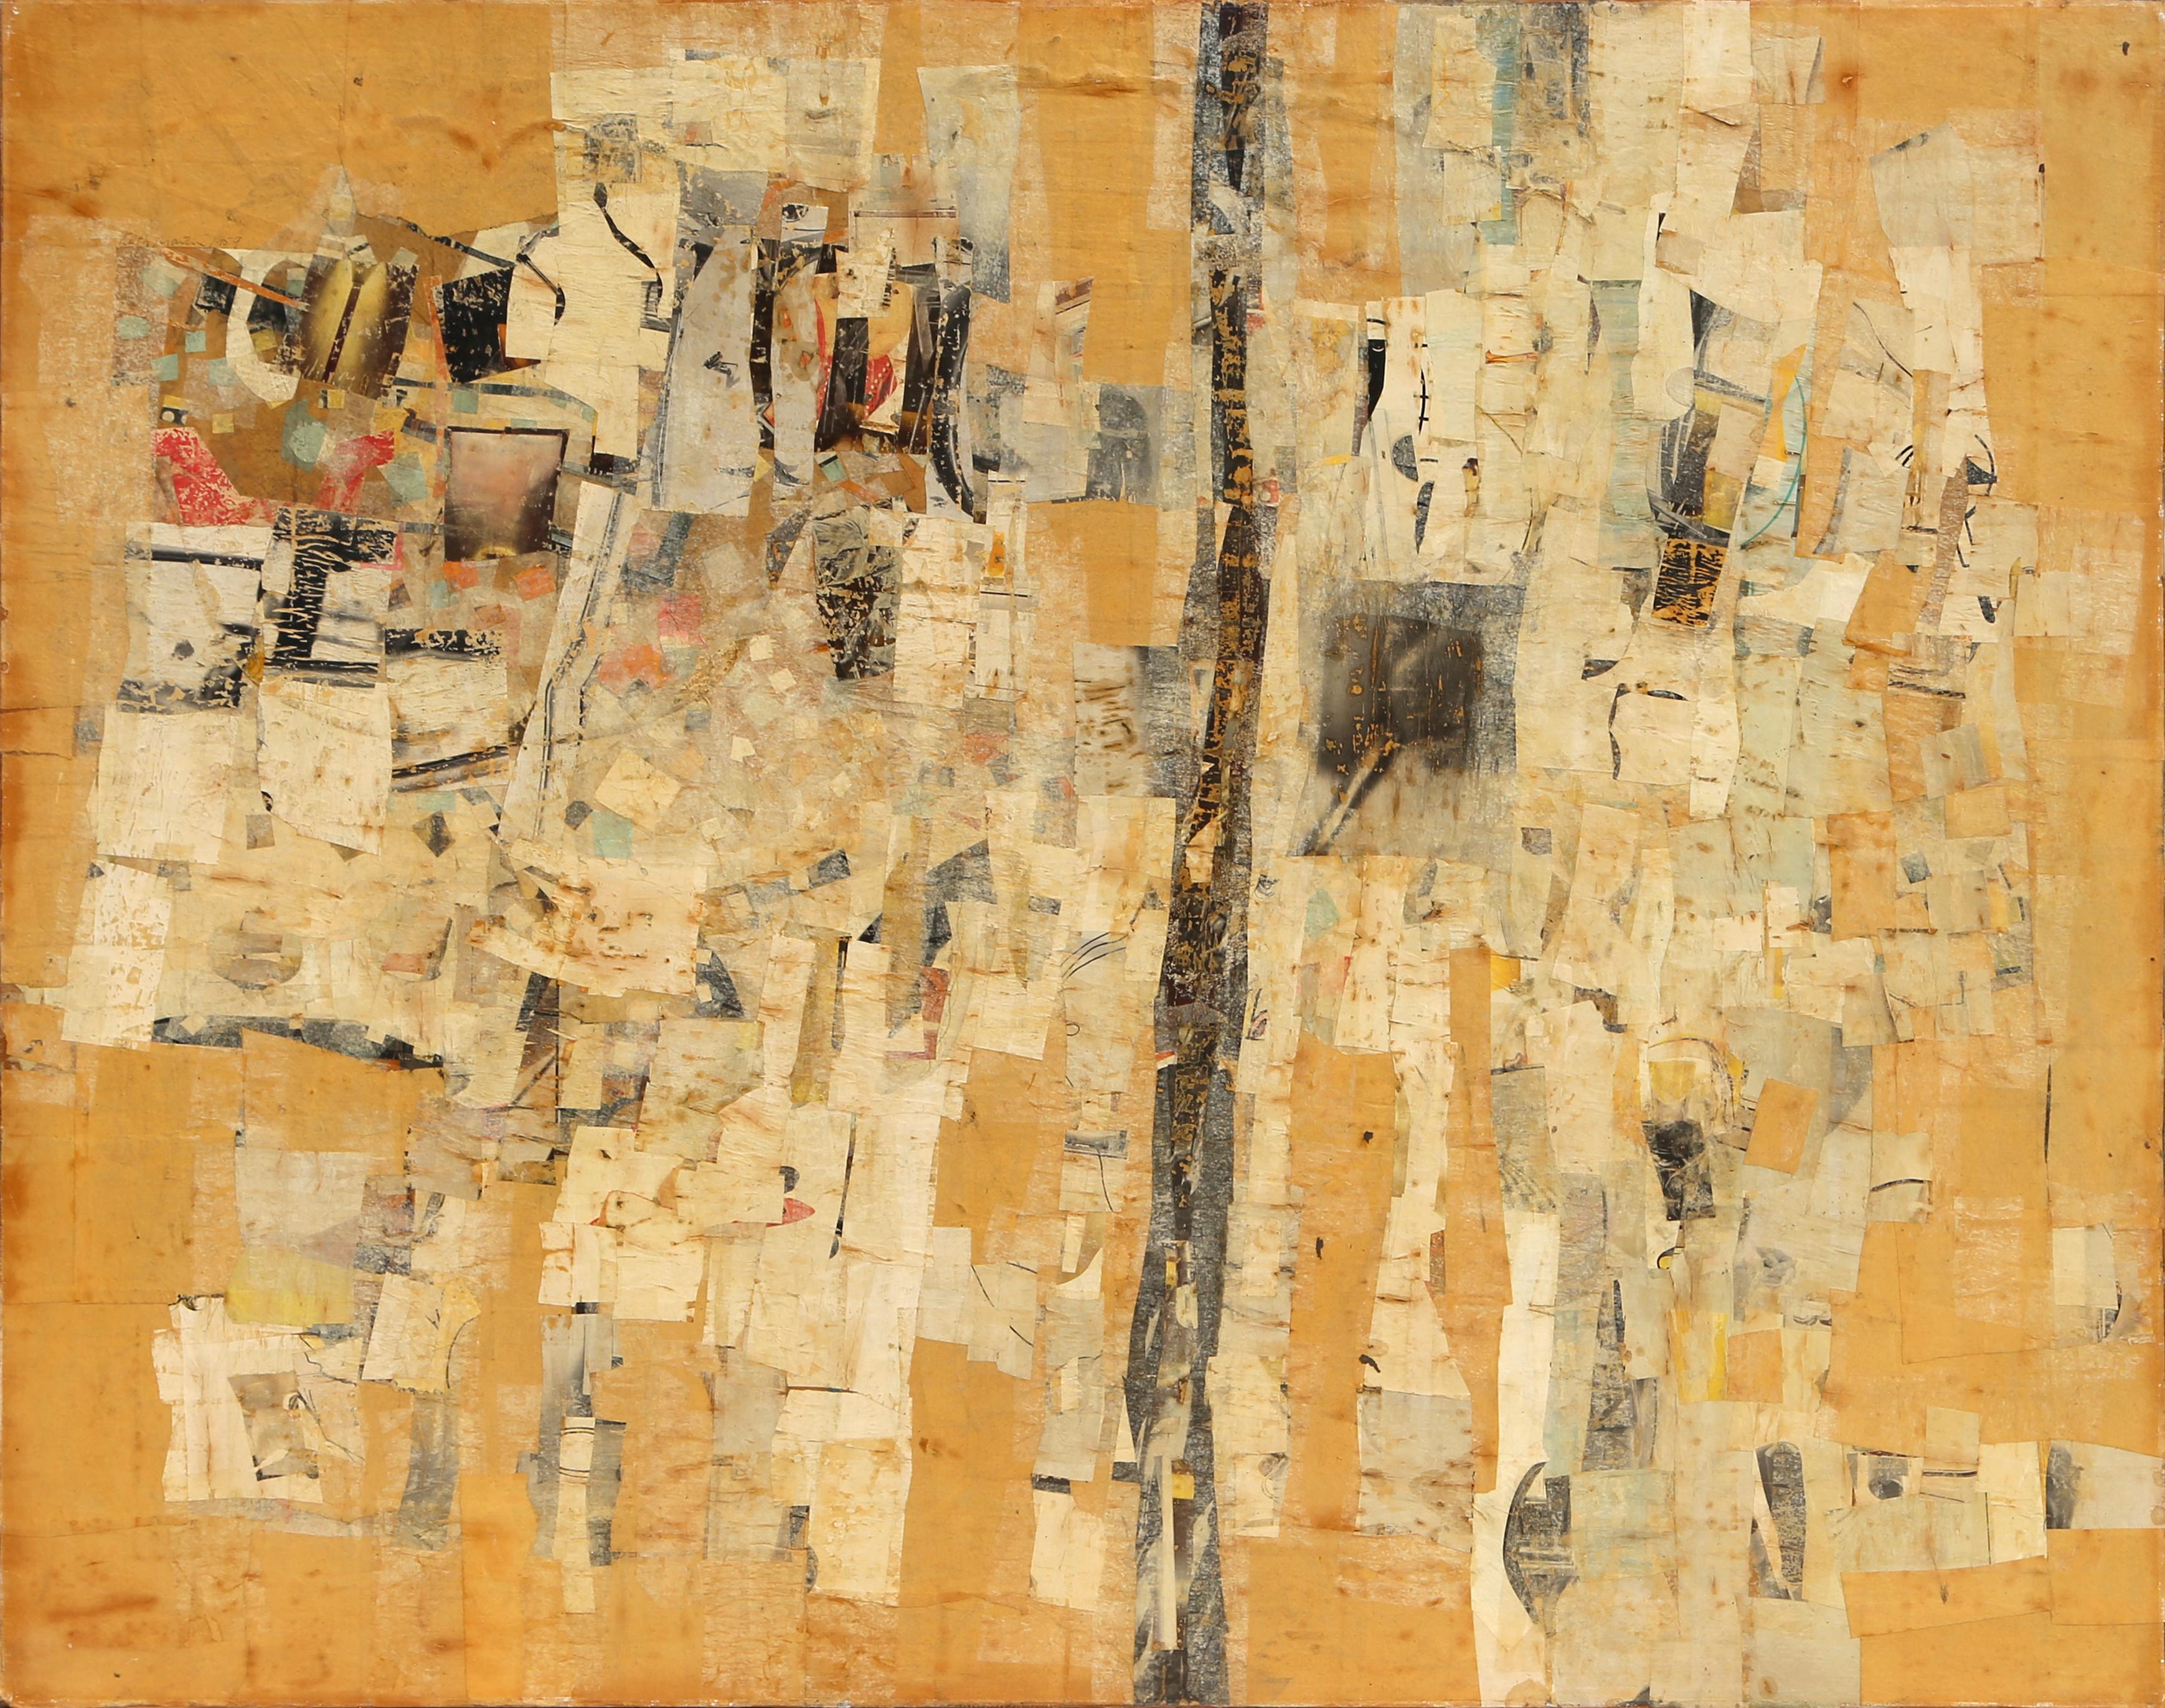 An abstract collage on wood by Kenneth Morrow Martin, American (1911-1983). Exhibited: 1st Knoxville Art Center National Exhibtion, 1961

White Landscape by Keith Morrow Martin, American (1911–1983)
Date: 1959
Collage on Wood Panel, signed and dated